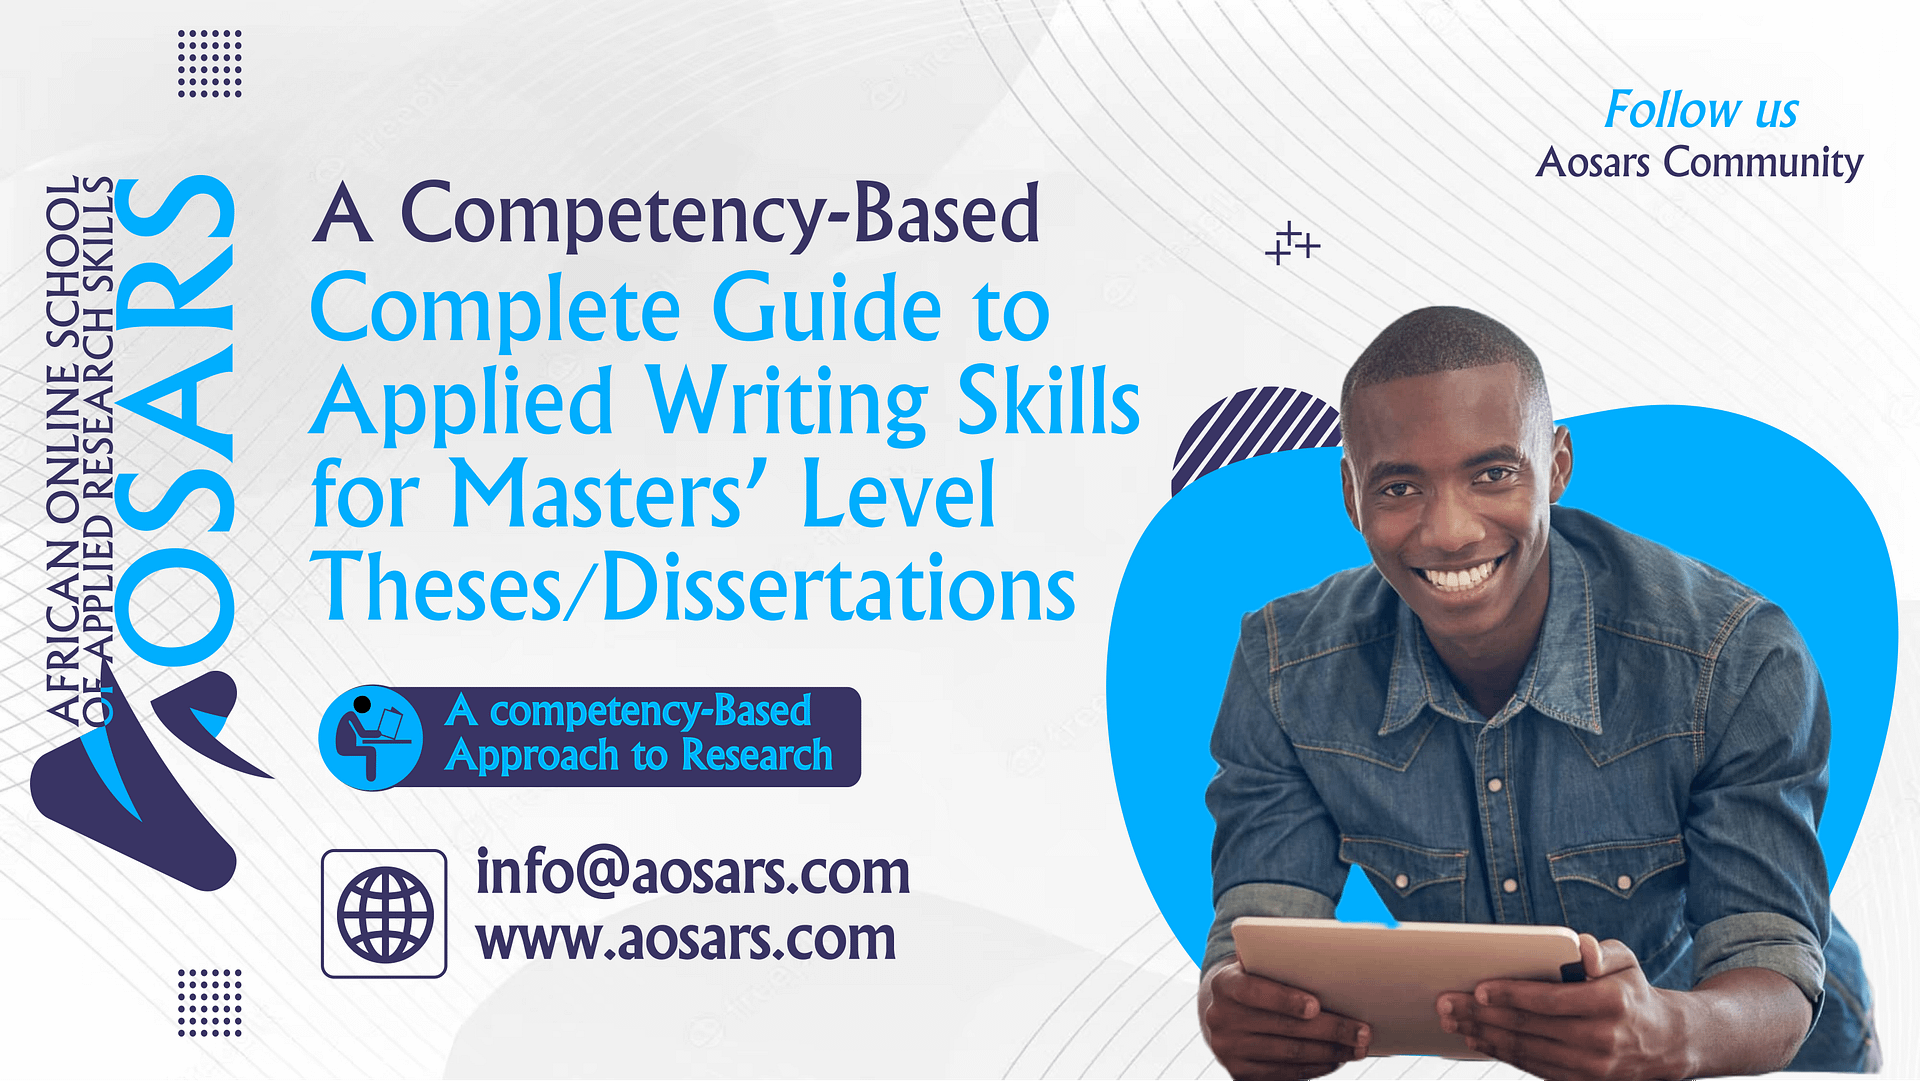 A Competency-Based Complete Guide to Applied Writing Skills for Masters’ level Theses/Dissertations